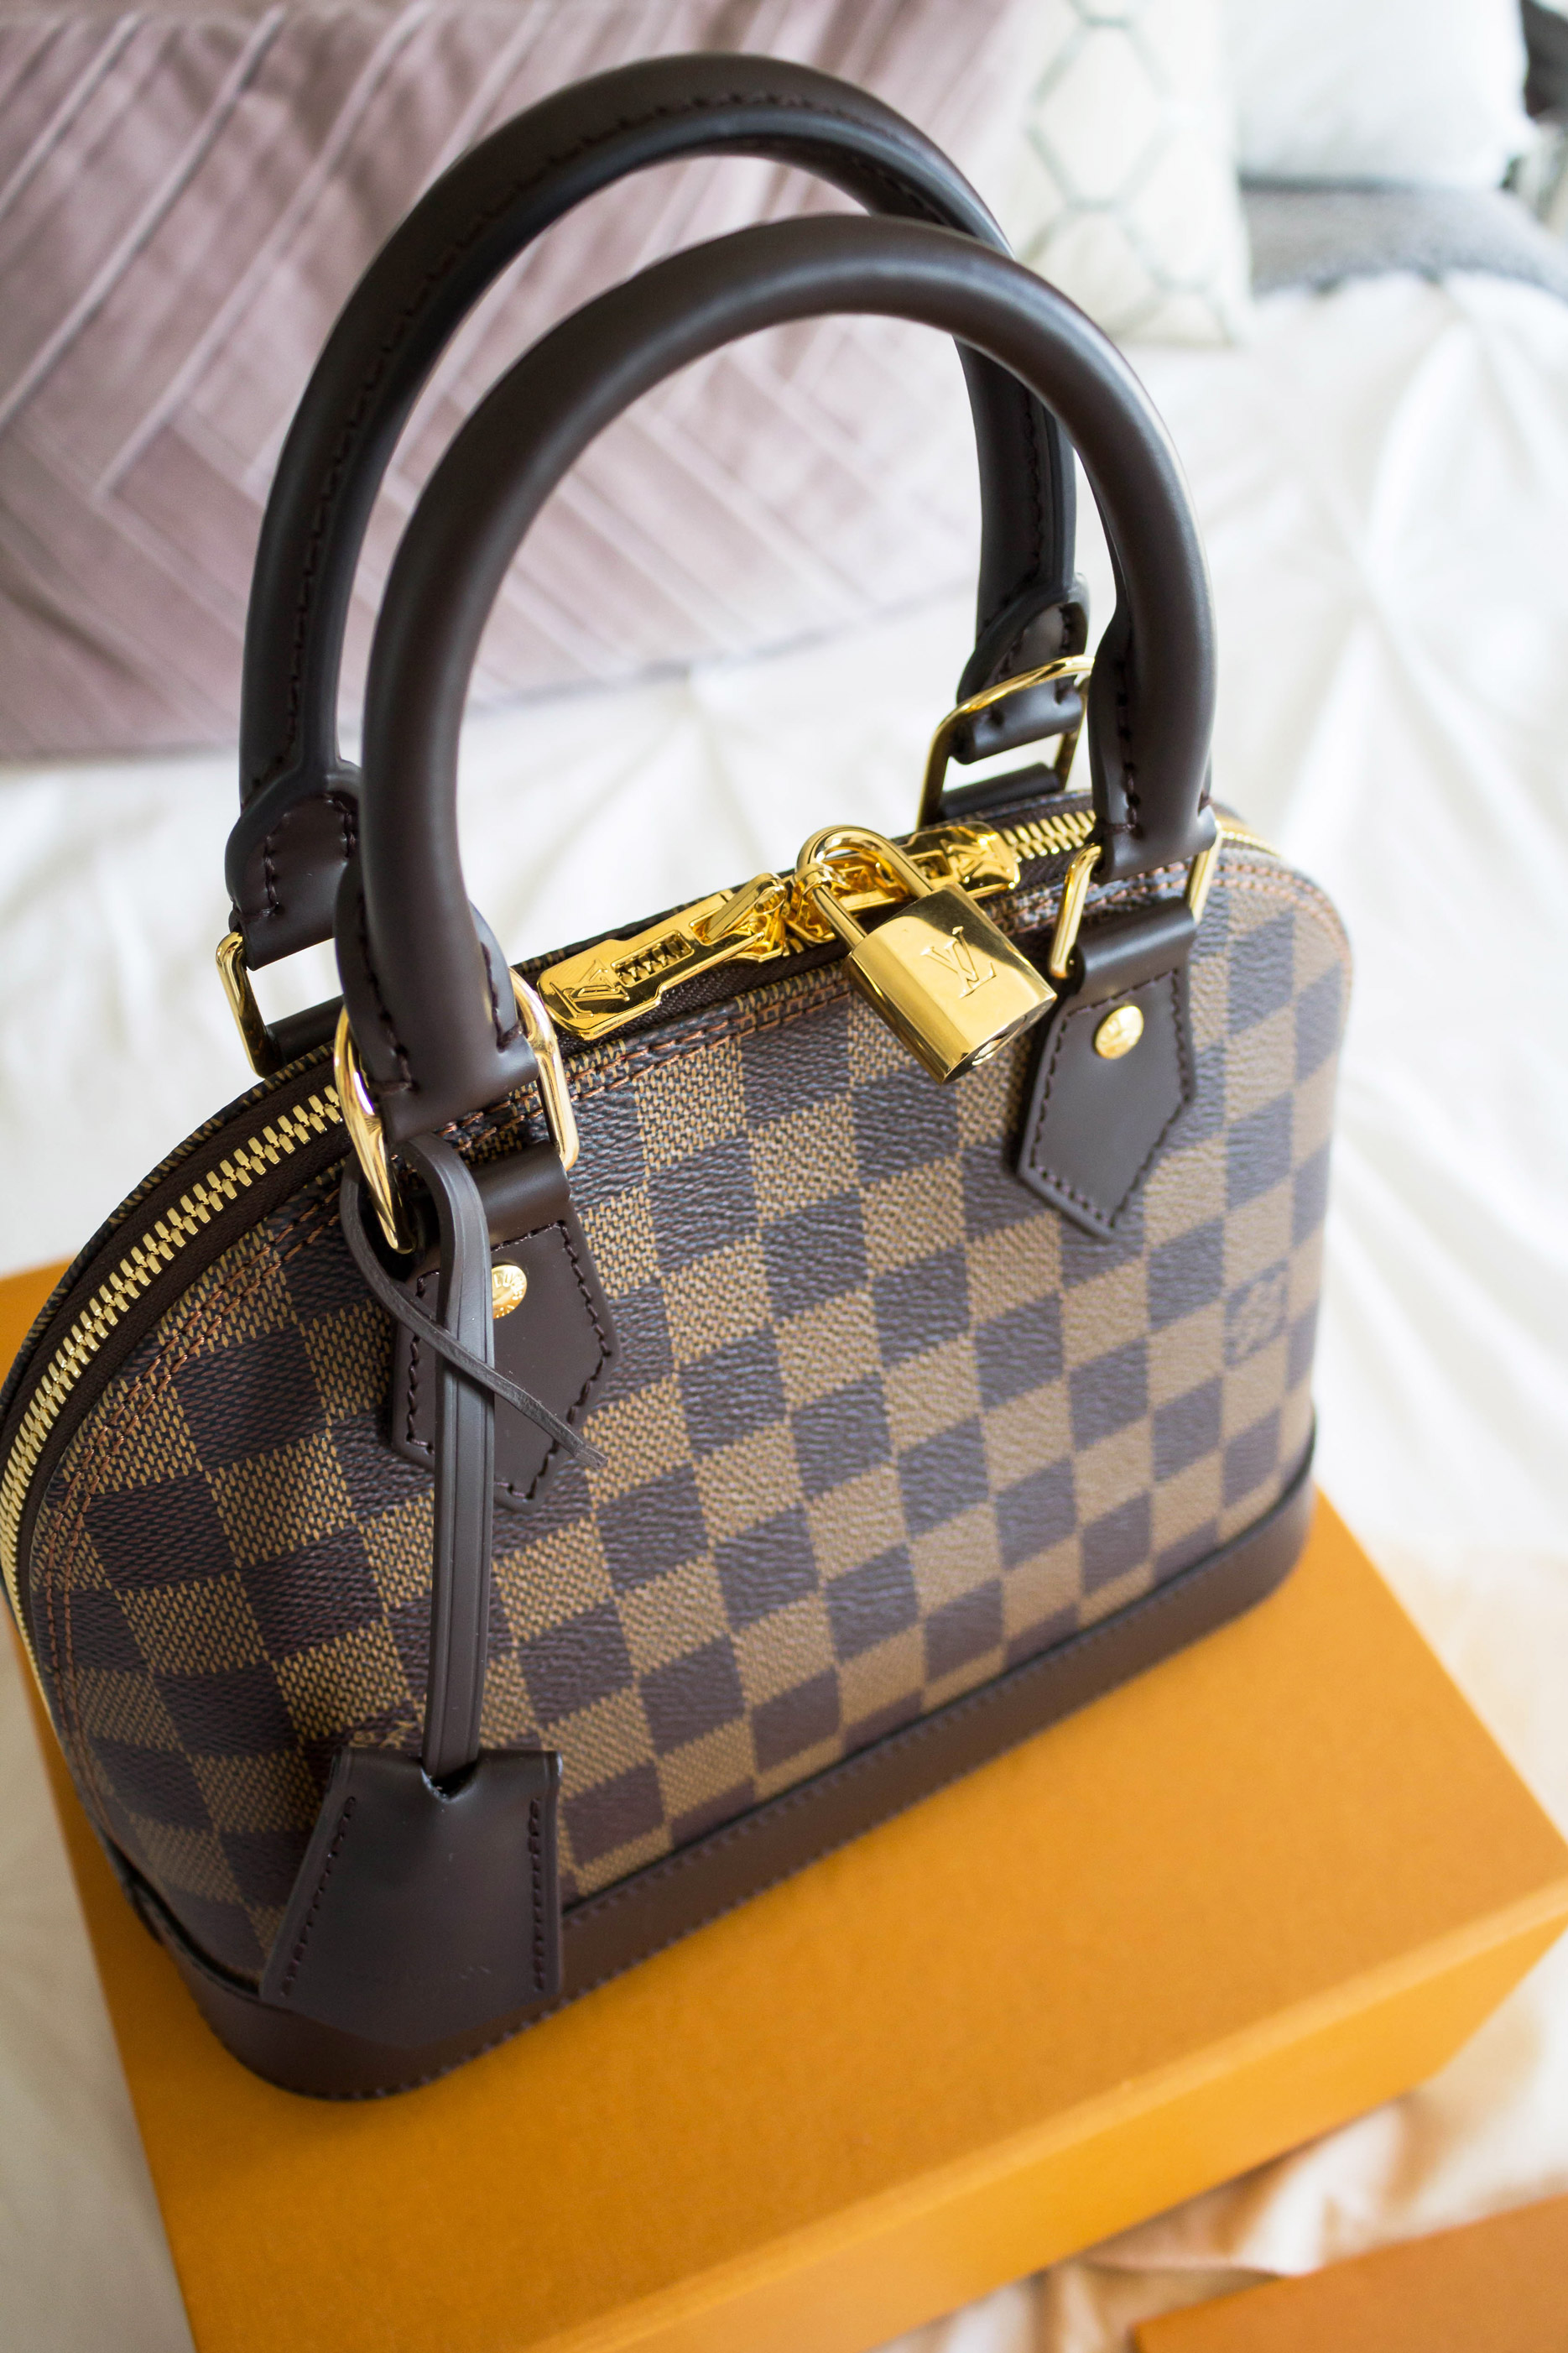 5 Fun Facts About Louis Vuitton Alma BB Bag That Will Entice You!